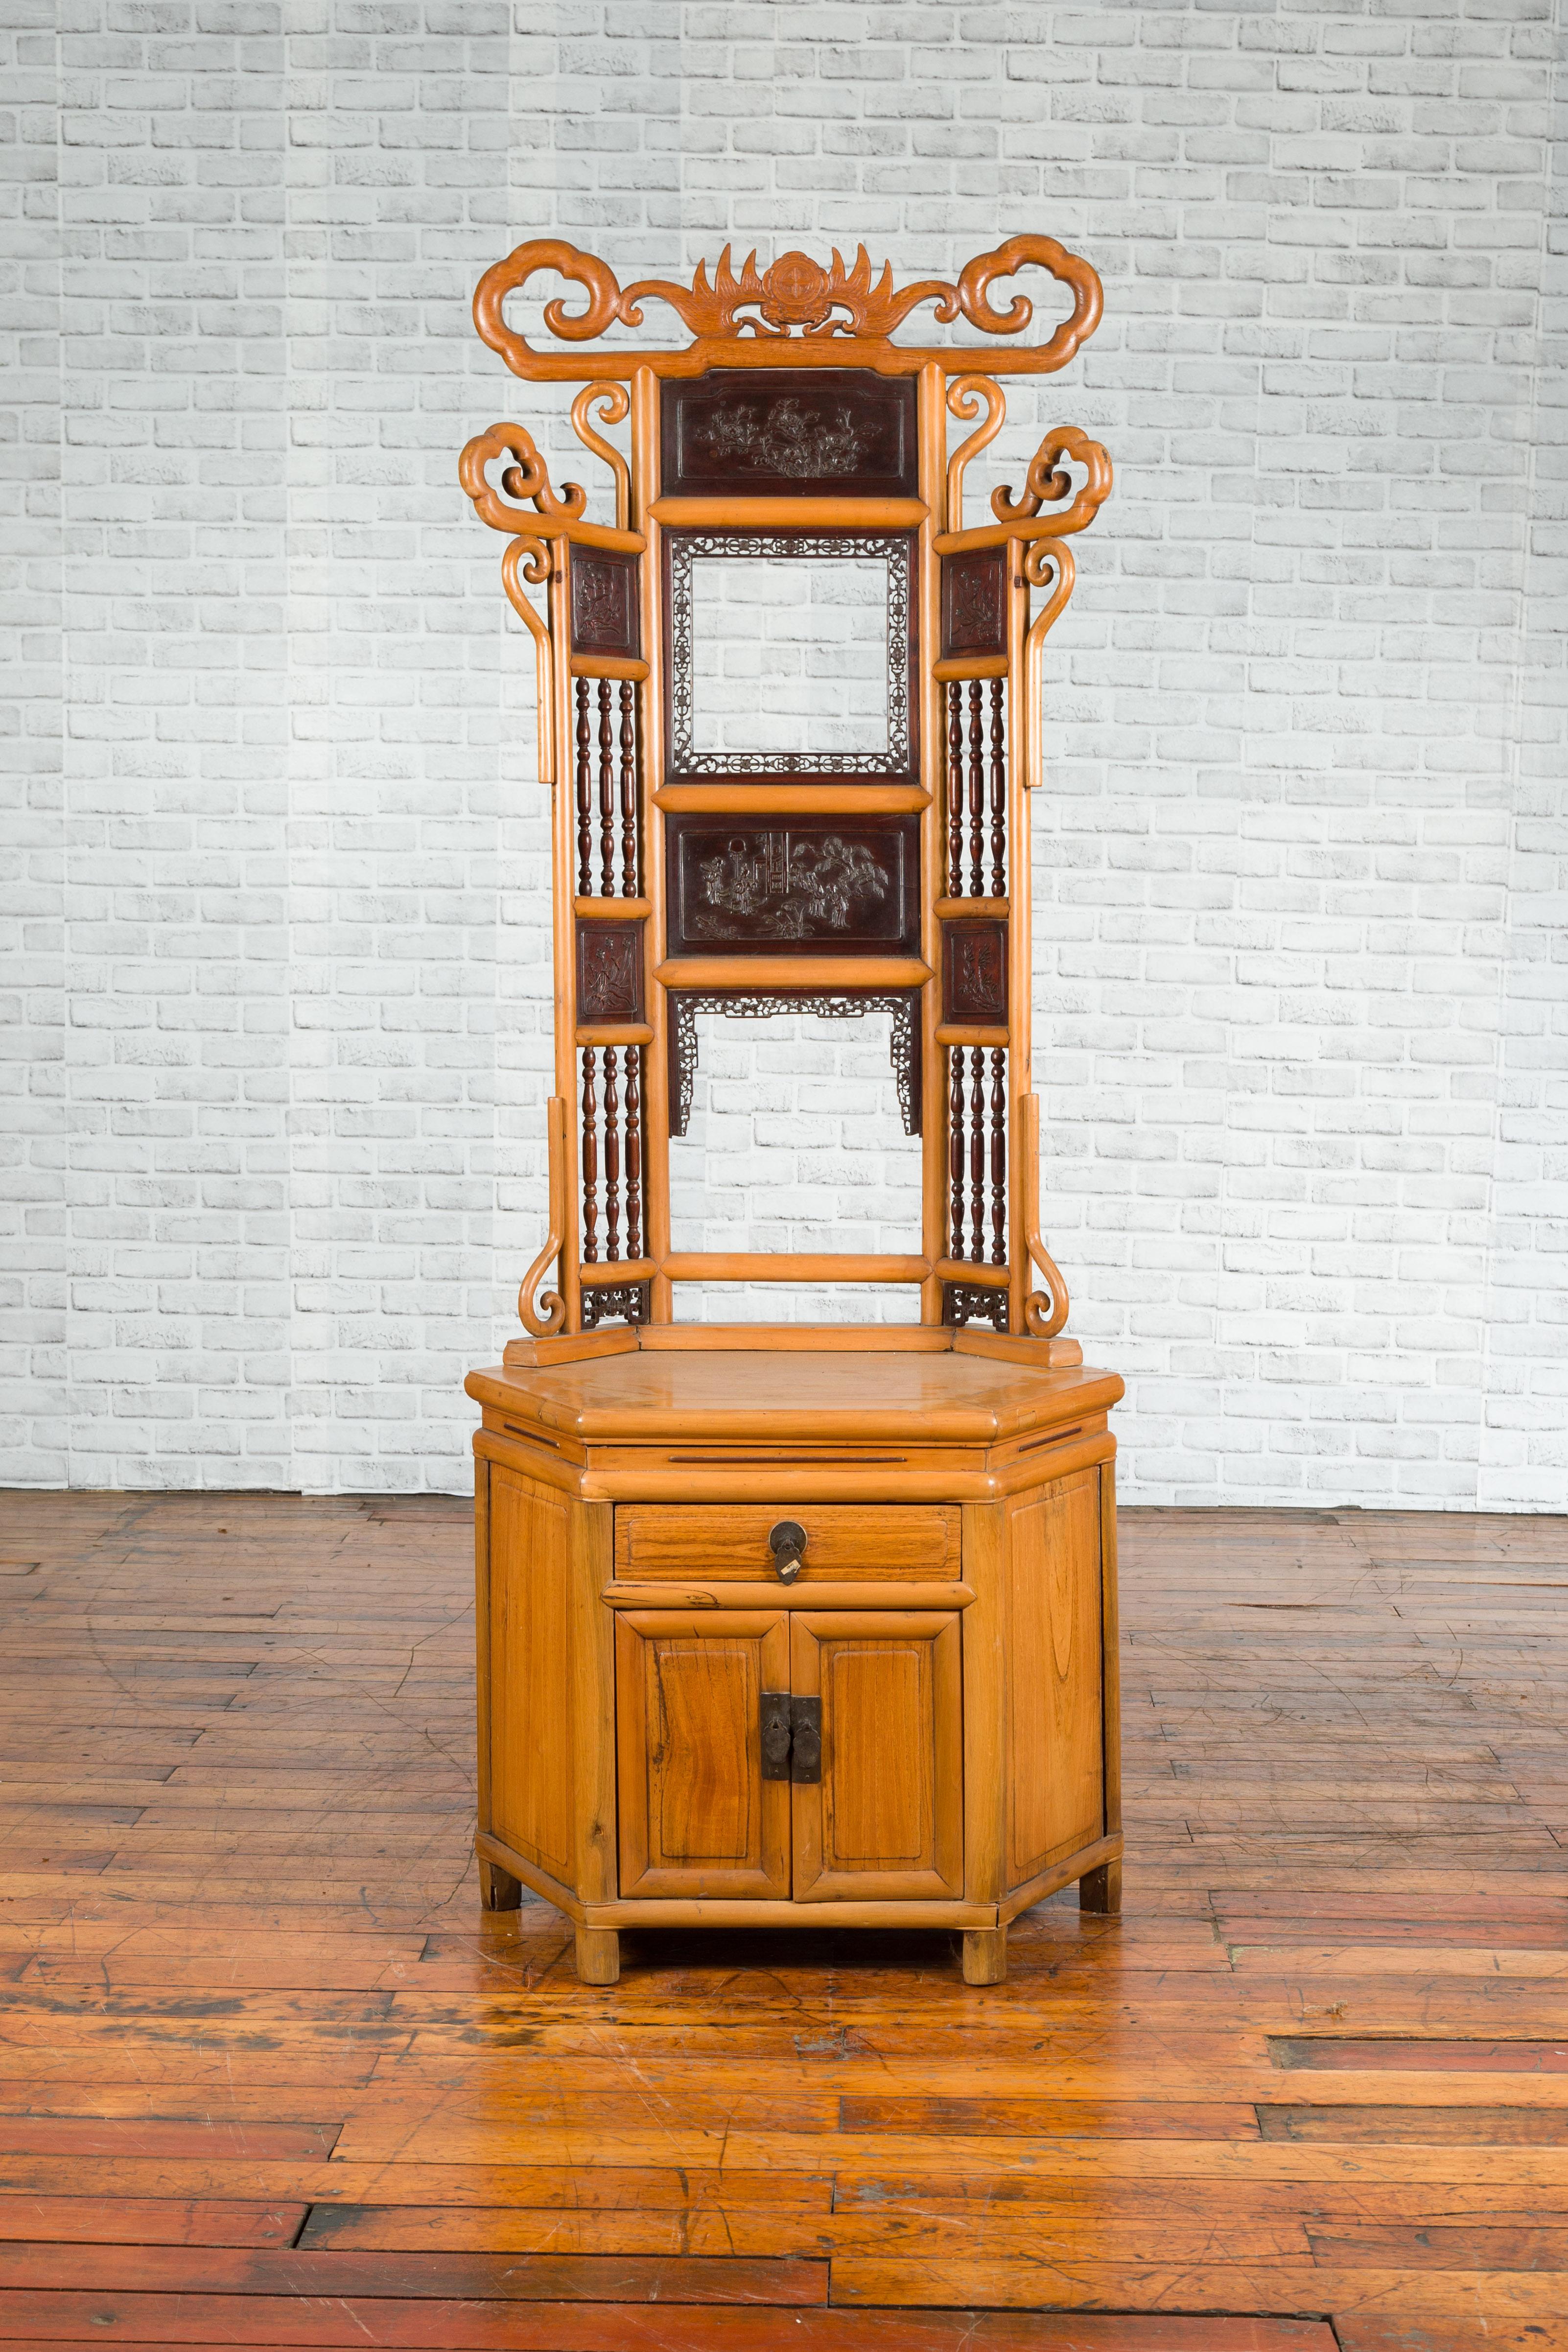 A Chinese Qing Dynasty period bamboo washstand from the 19th century, with carved and lacquered panels. Created in China during the Qing Dynasty, this bamboo washstand draws our attention with its scrolling lines and complimenting colors. Six dark